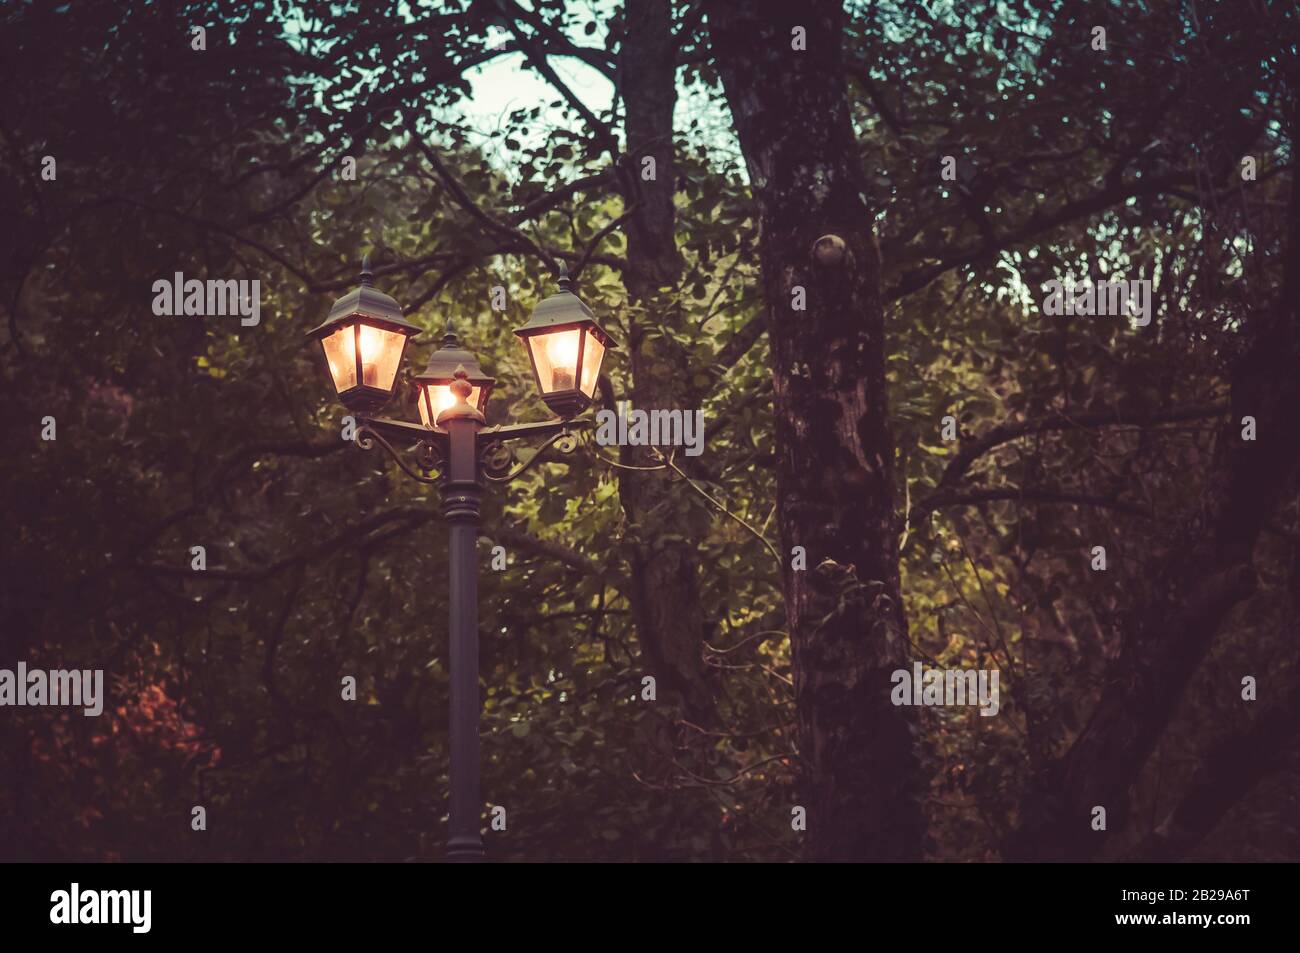 Victorian street lamp, lit, surrounded by trees Stock Photo